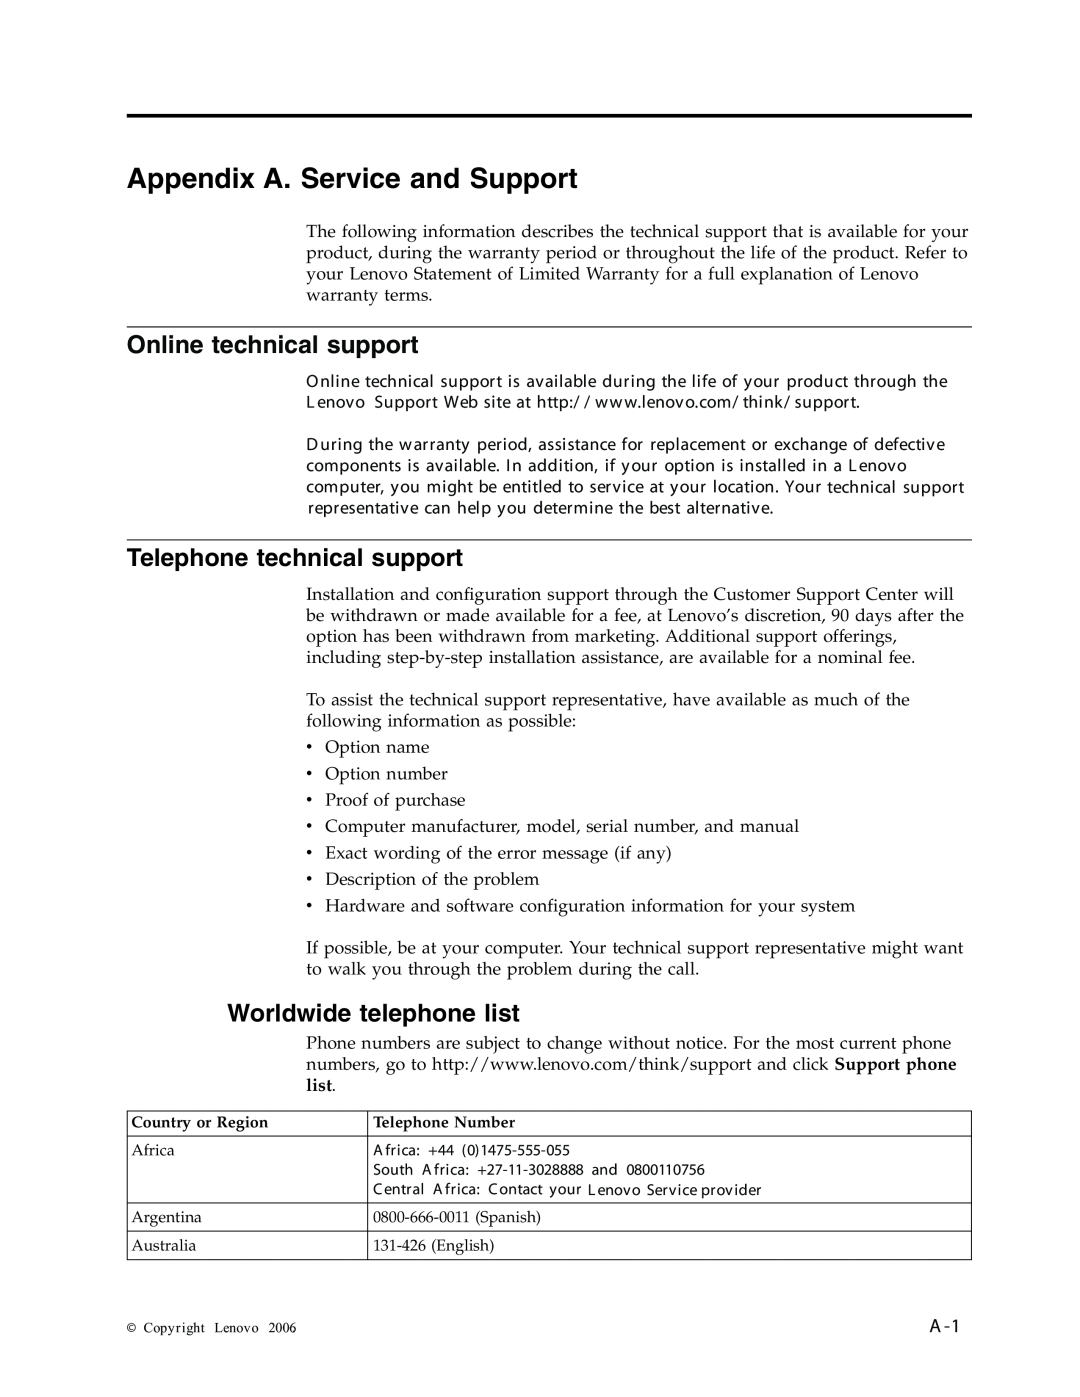 Lenovo 4428-AB1 manual Appendix A. Service and Support, Online technical support, Telephone technical support 